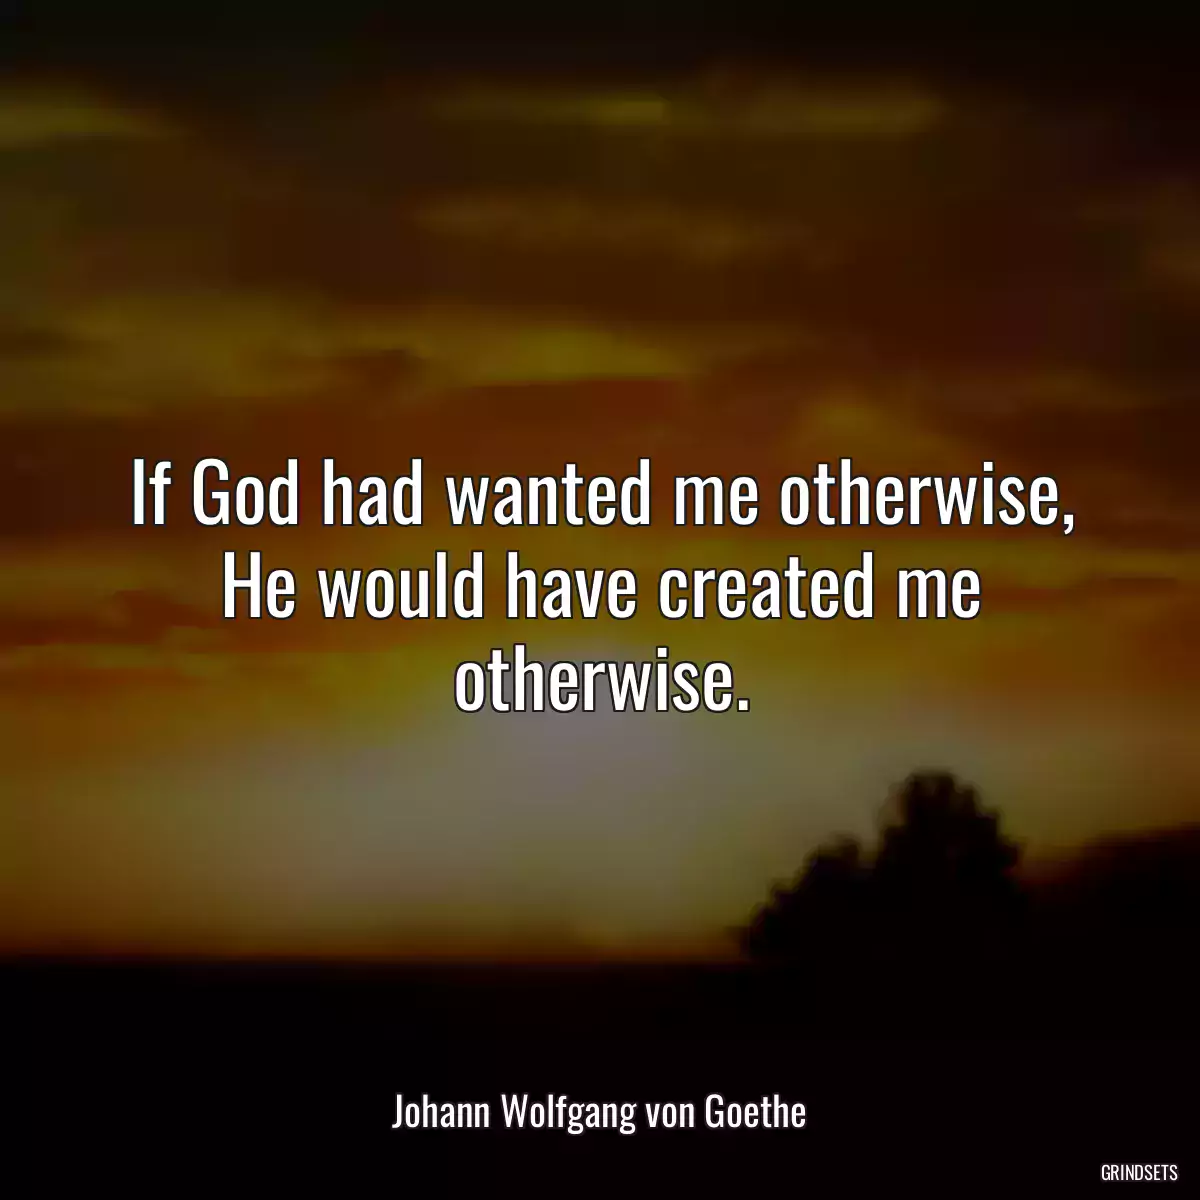 If God had wanted me otherwise, He would have created me otherwise.